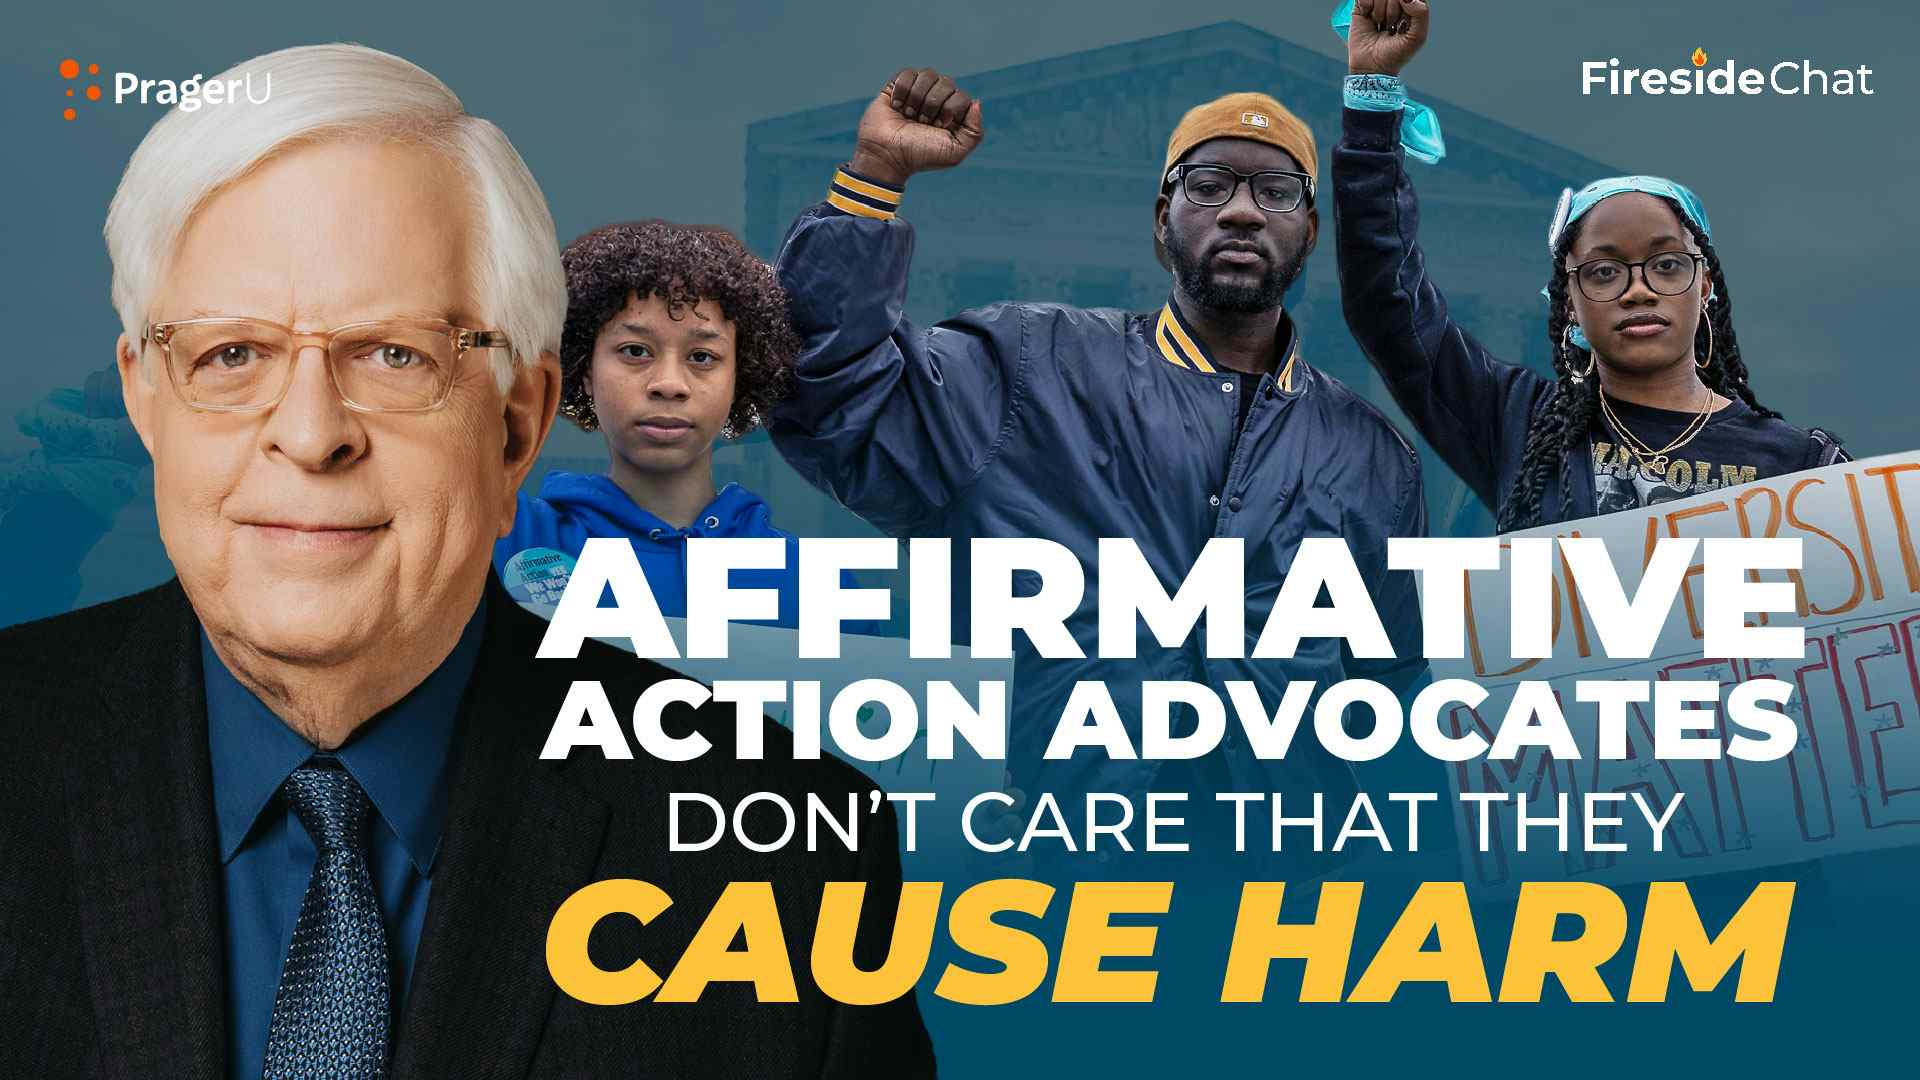 Affirmative Action Advocates Don’t Care That They Cause Harm